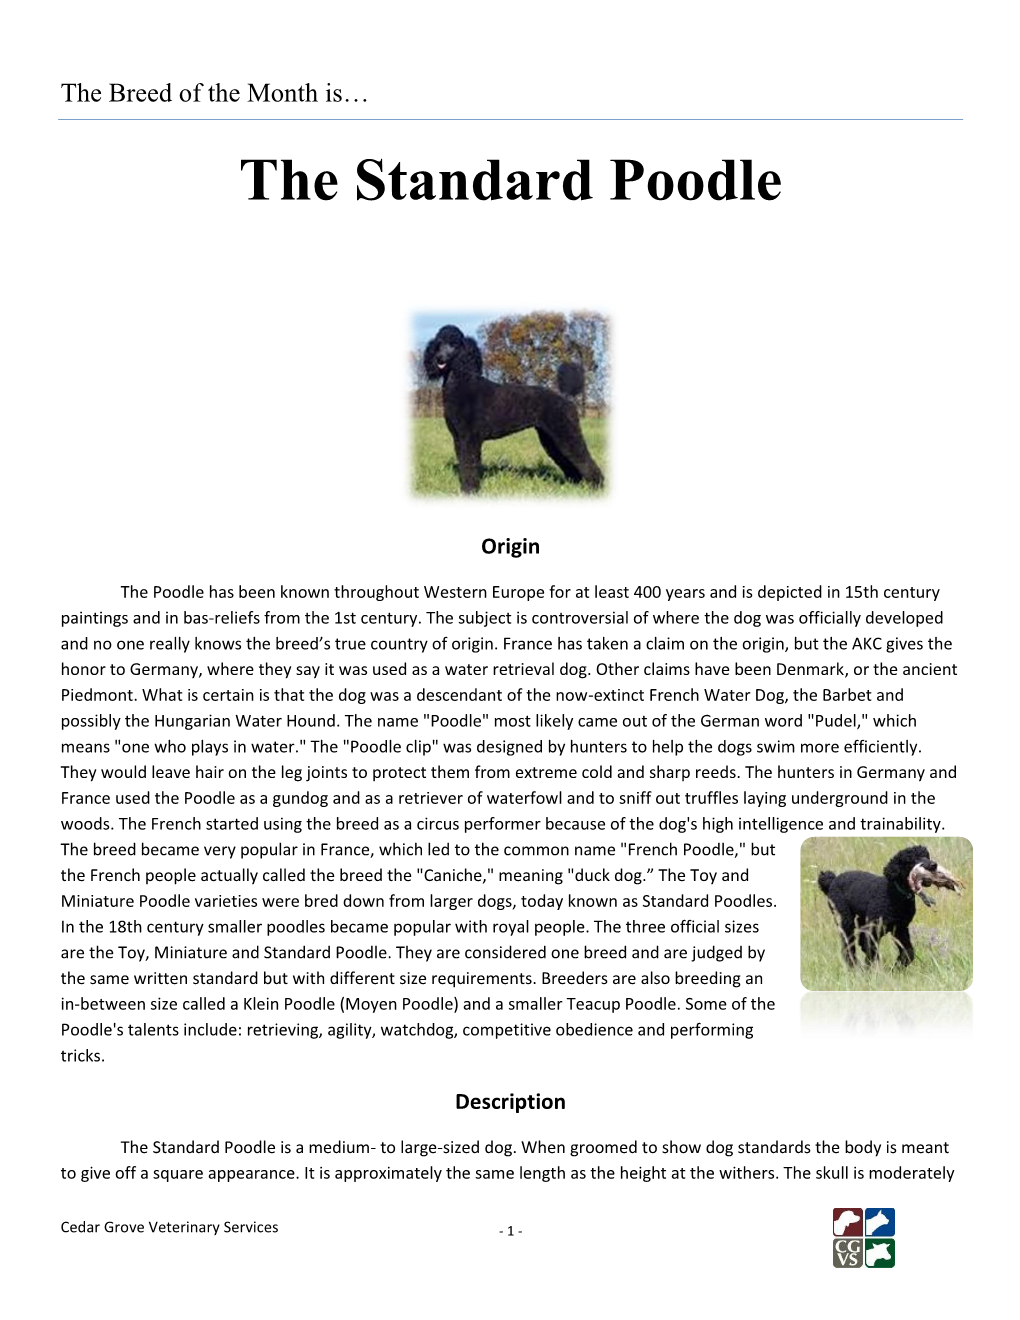 The Standard Poodle